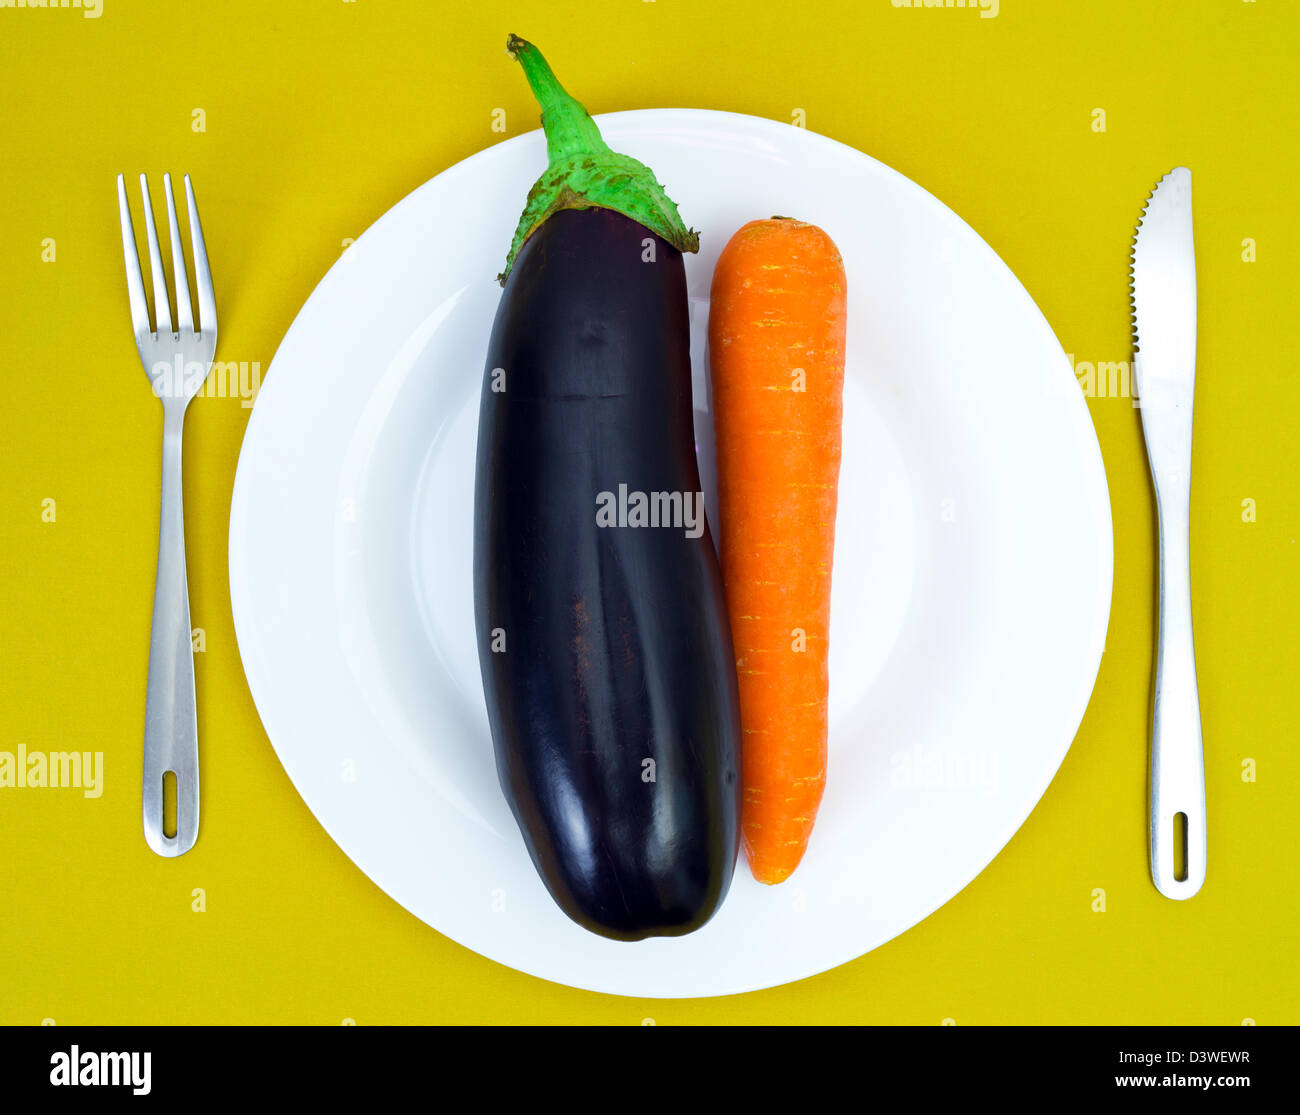 Eggplant and carrot on a white plate Stock Photo